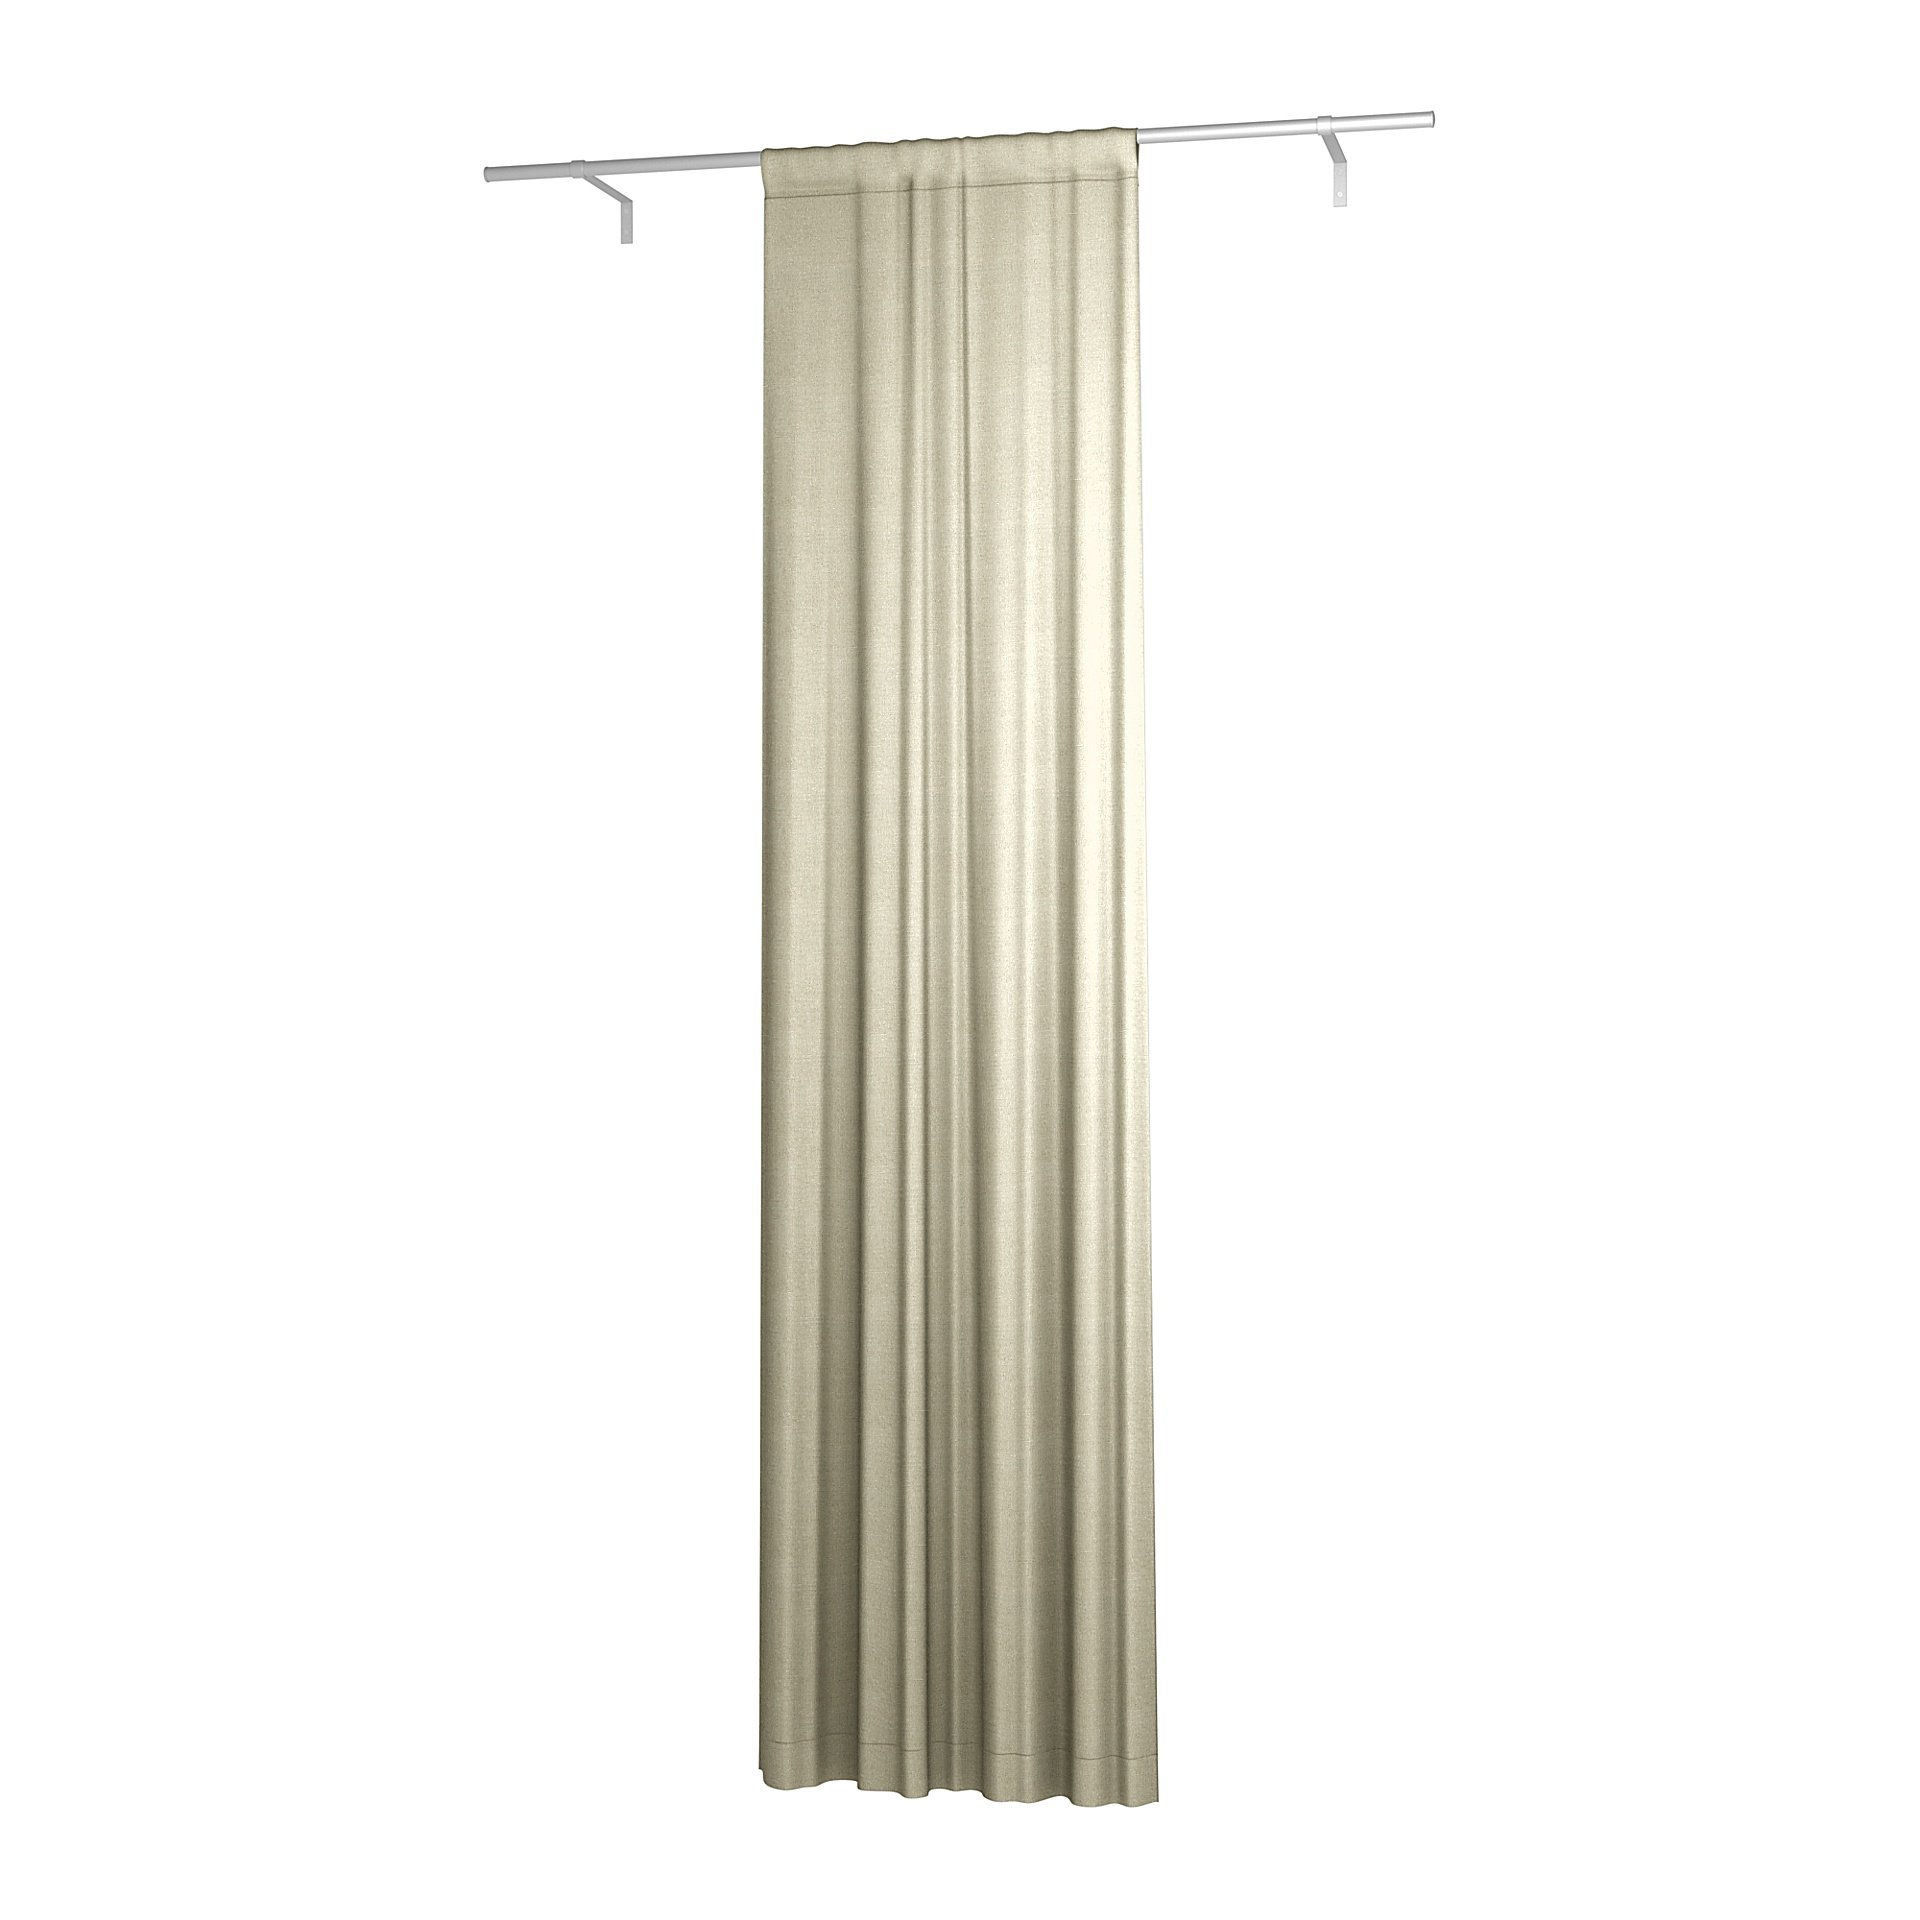 Single Width Curtain Panel with Tunnel/Creaseband, Lined, 300 cm, Pebble, Linen - Bemz